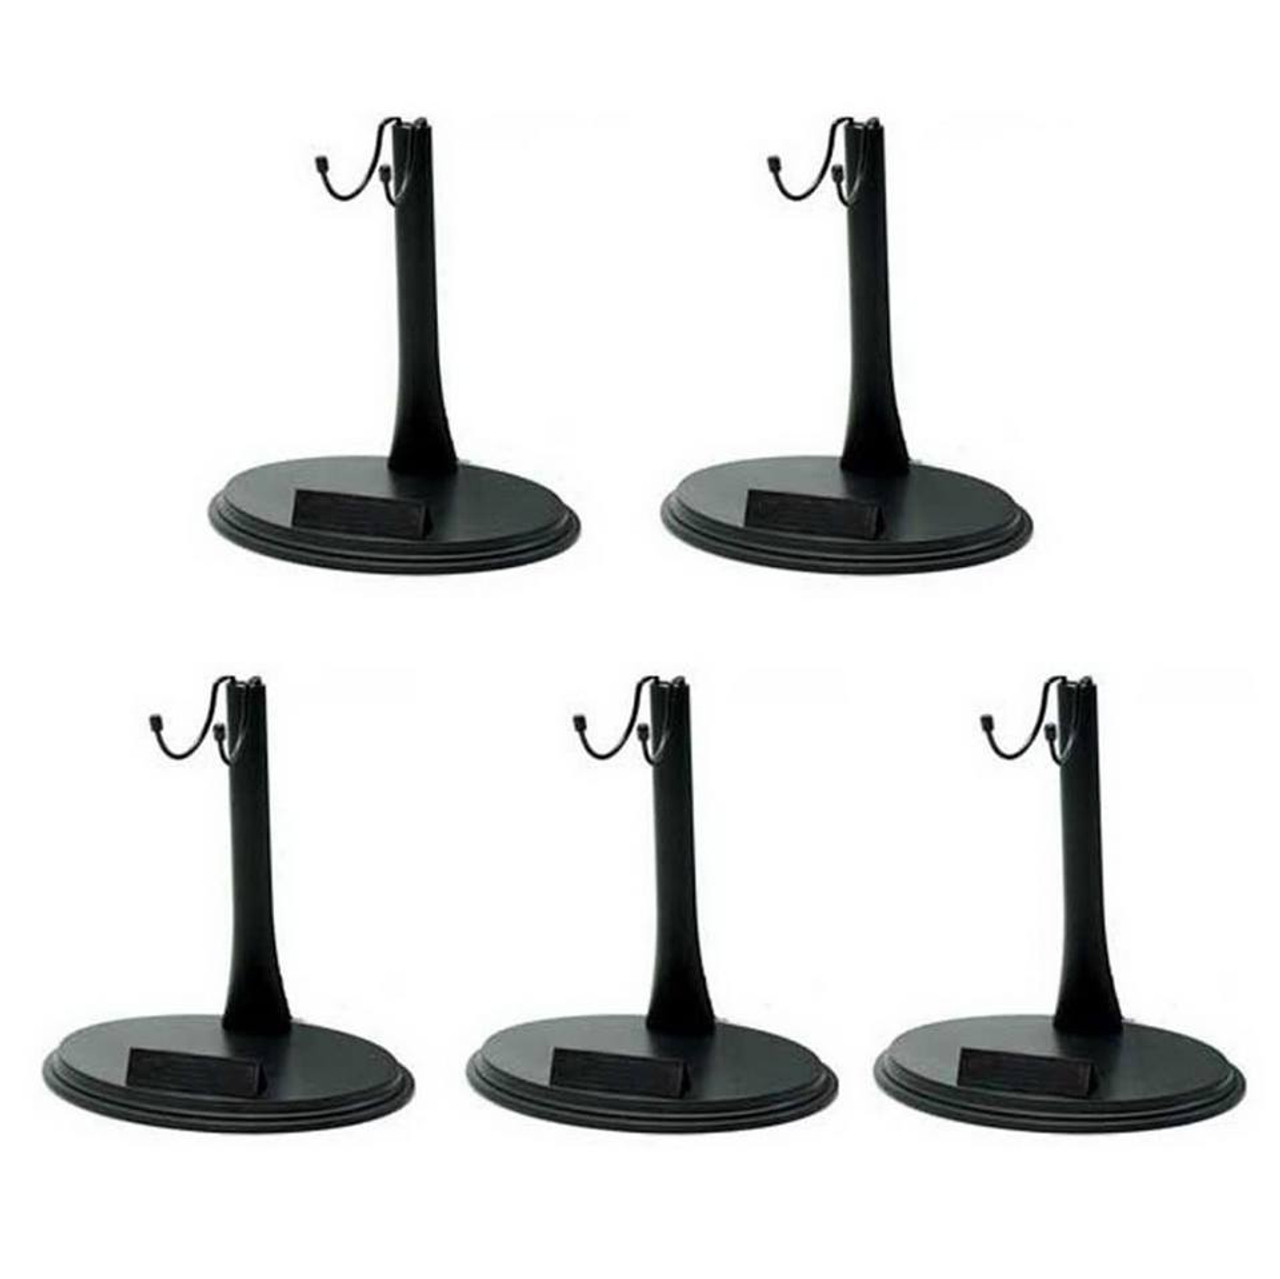 Custom 1/6 scale Action Figure Display Stand set of 5 (in stock) - TNS  Figures